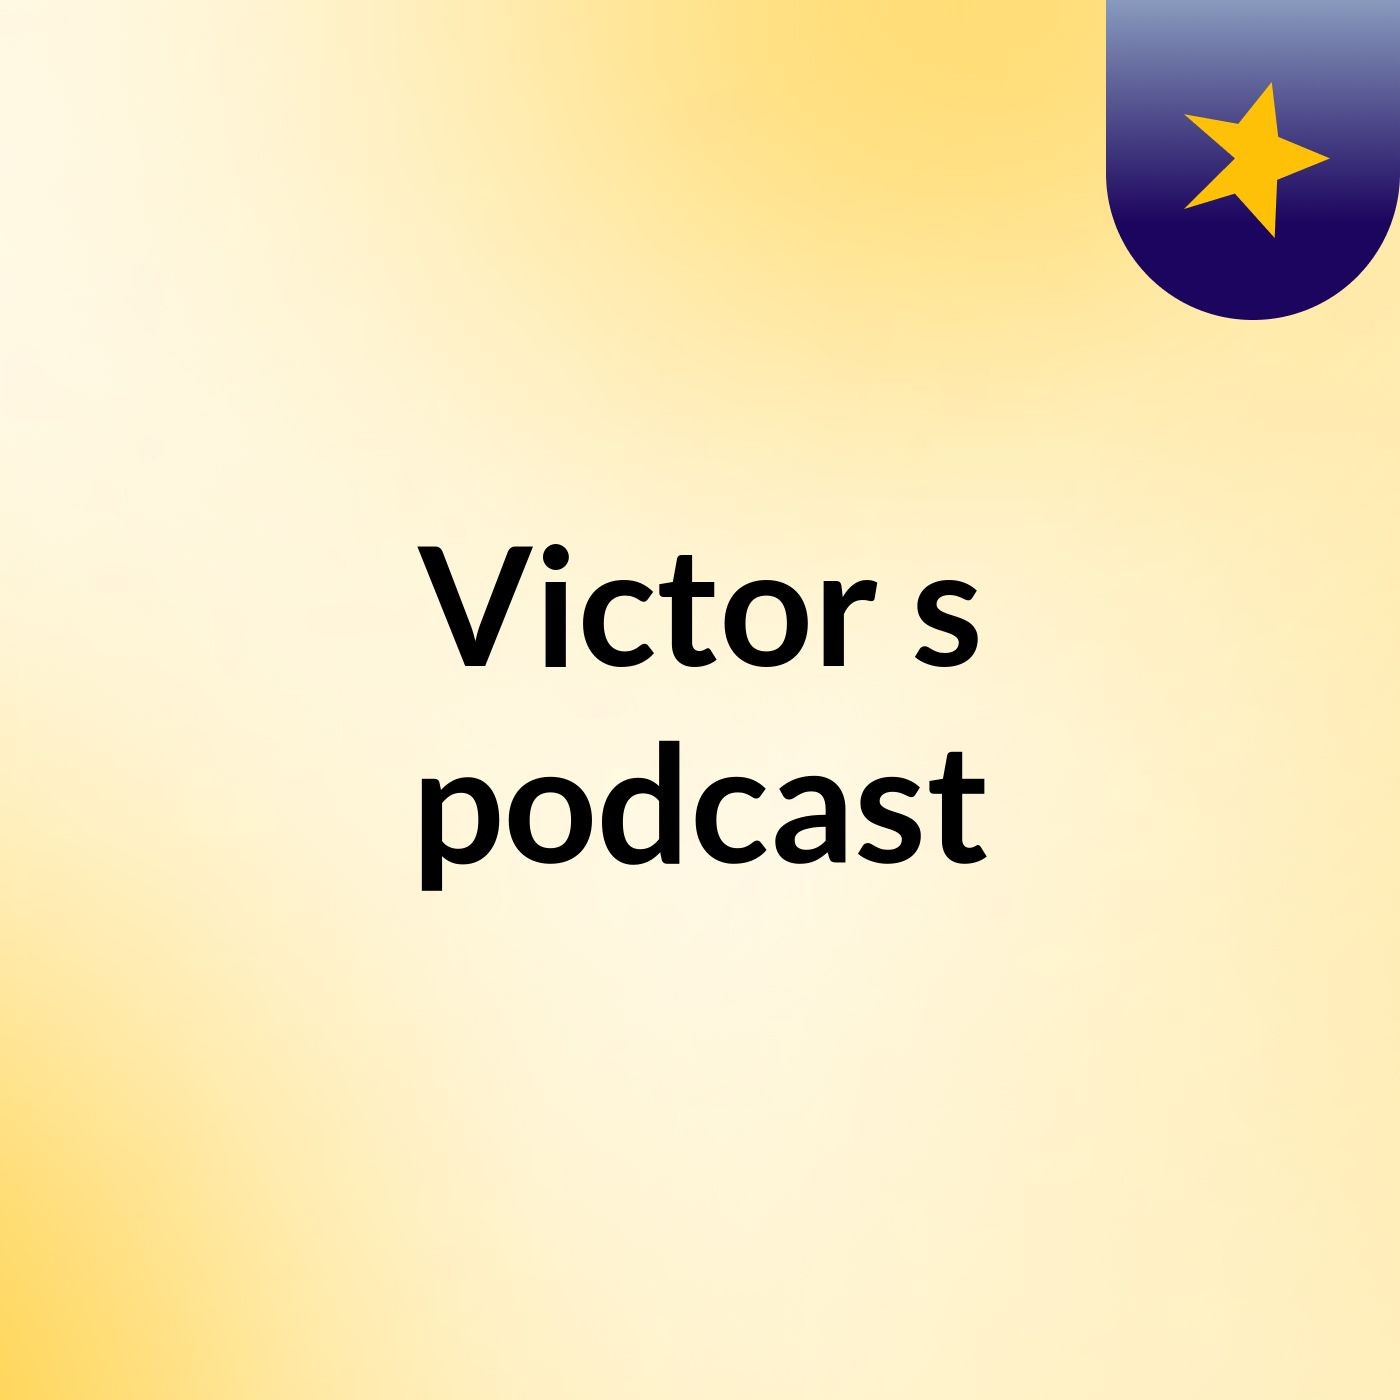 Victor's podcast